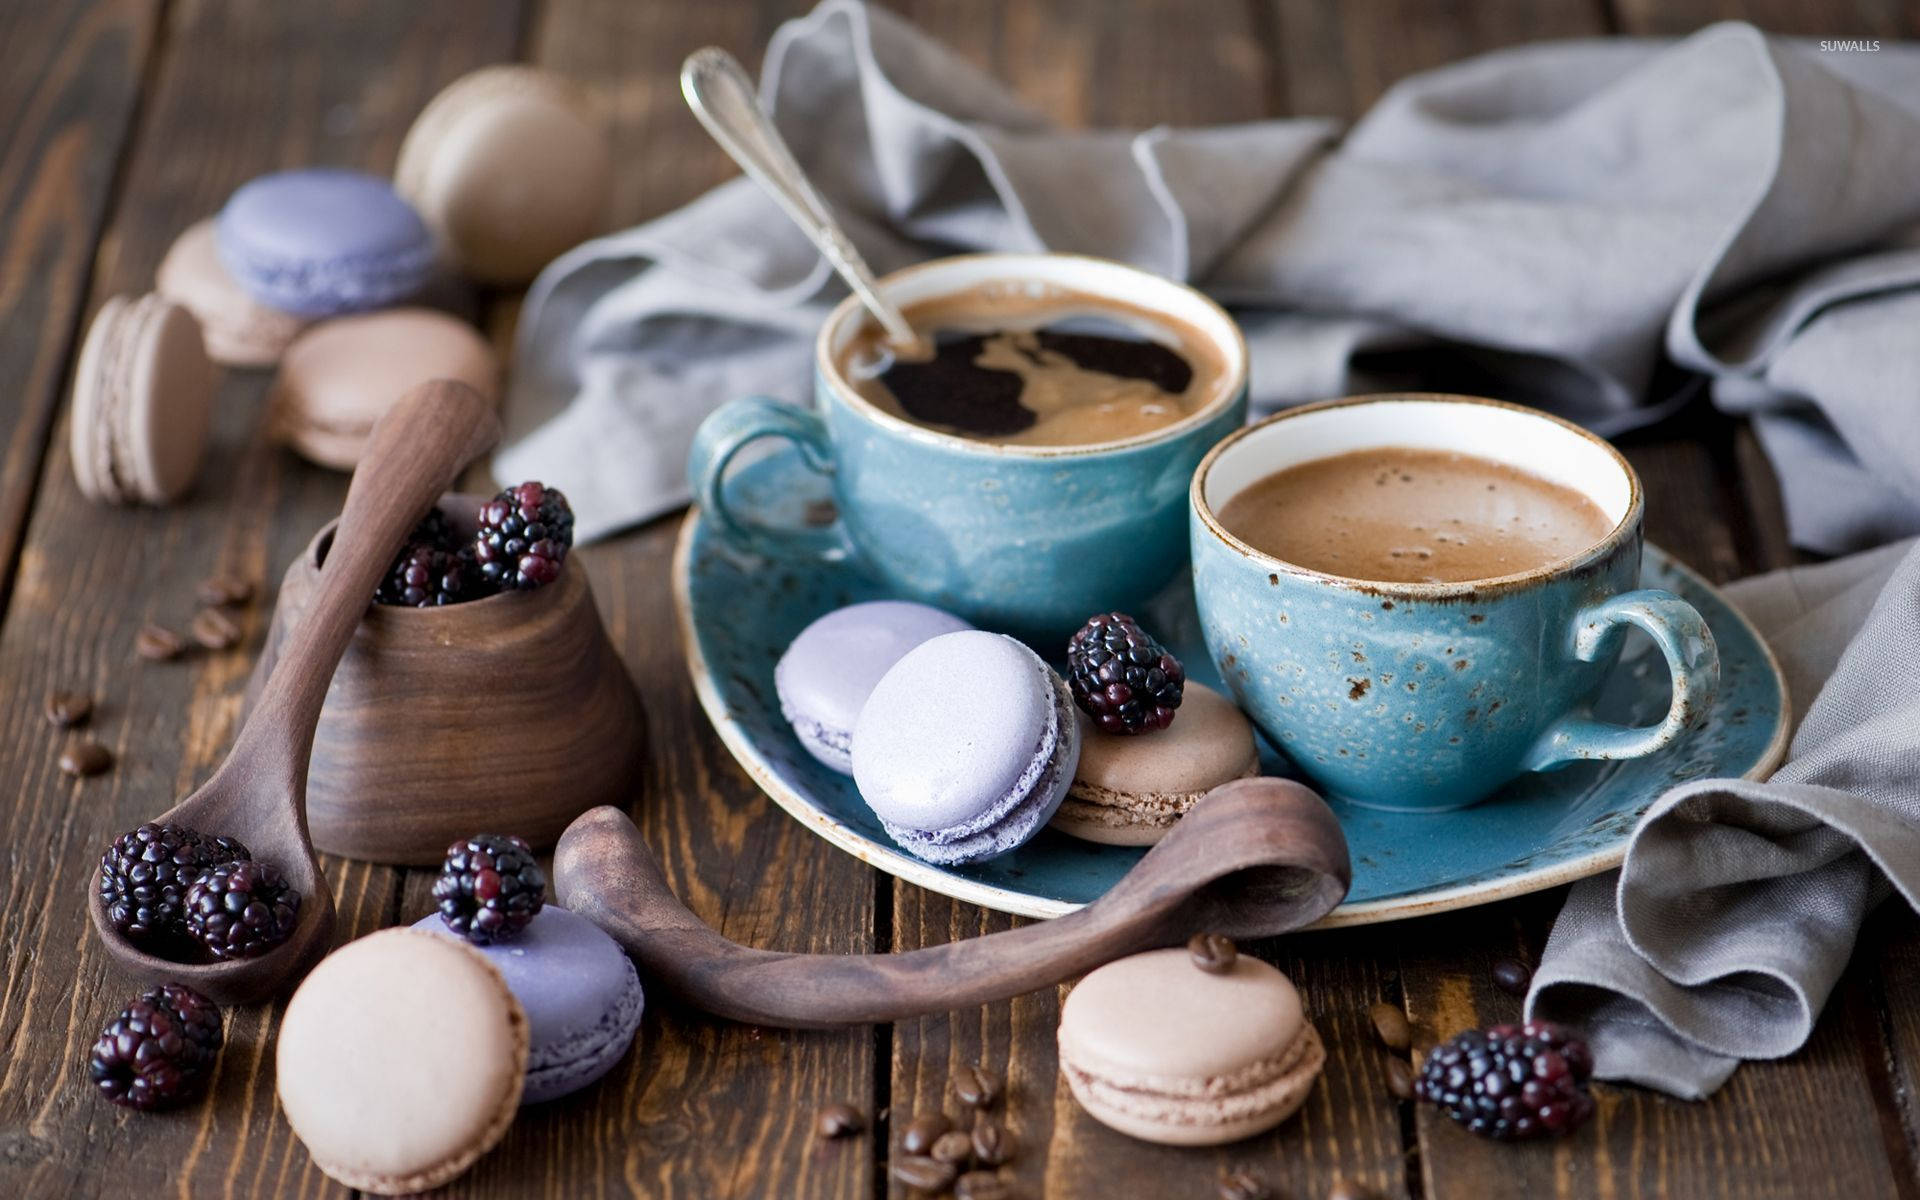 Enjoy A Cup Of Coffee And French Macaroons For The Perfect Sweet And Satisfying Snack. Background